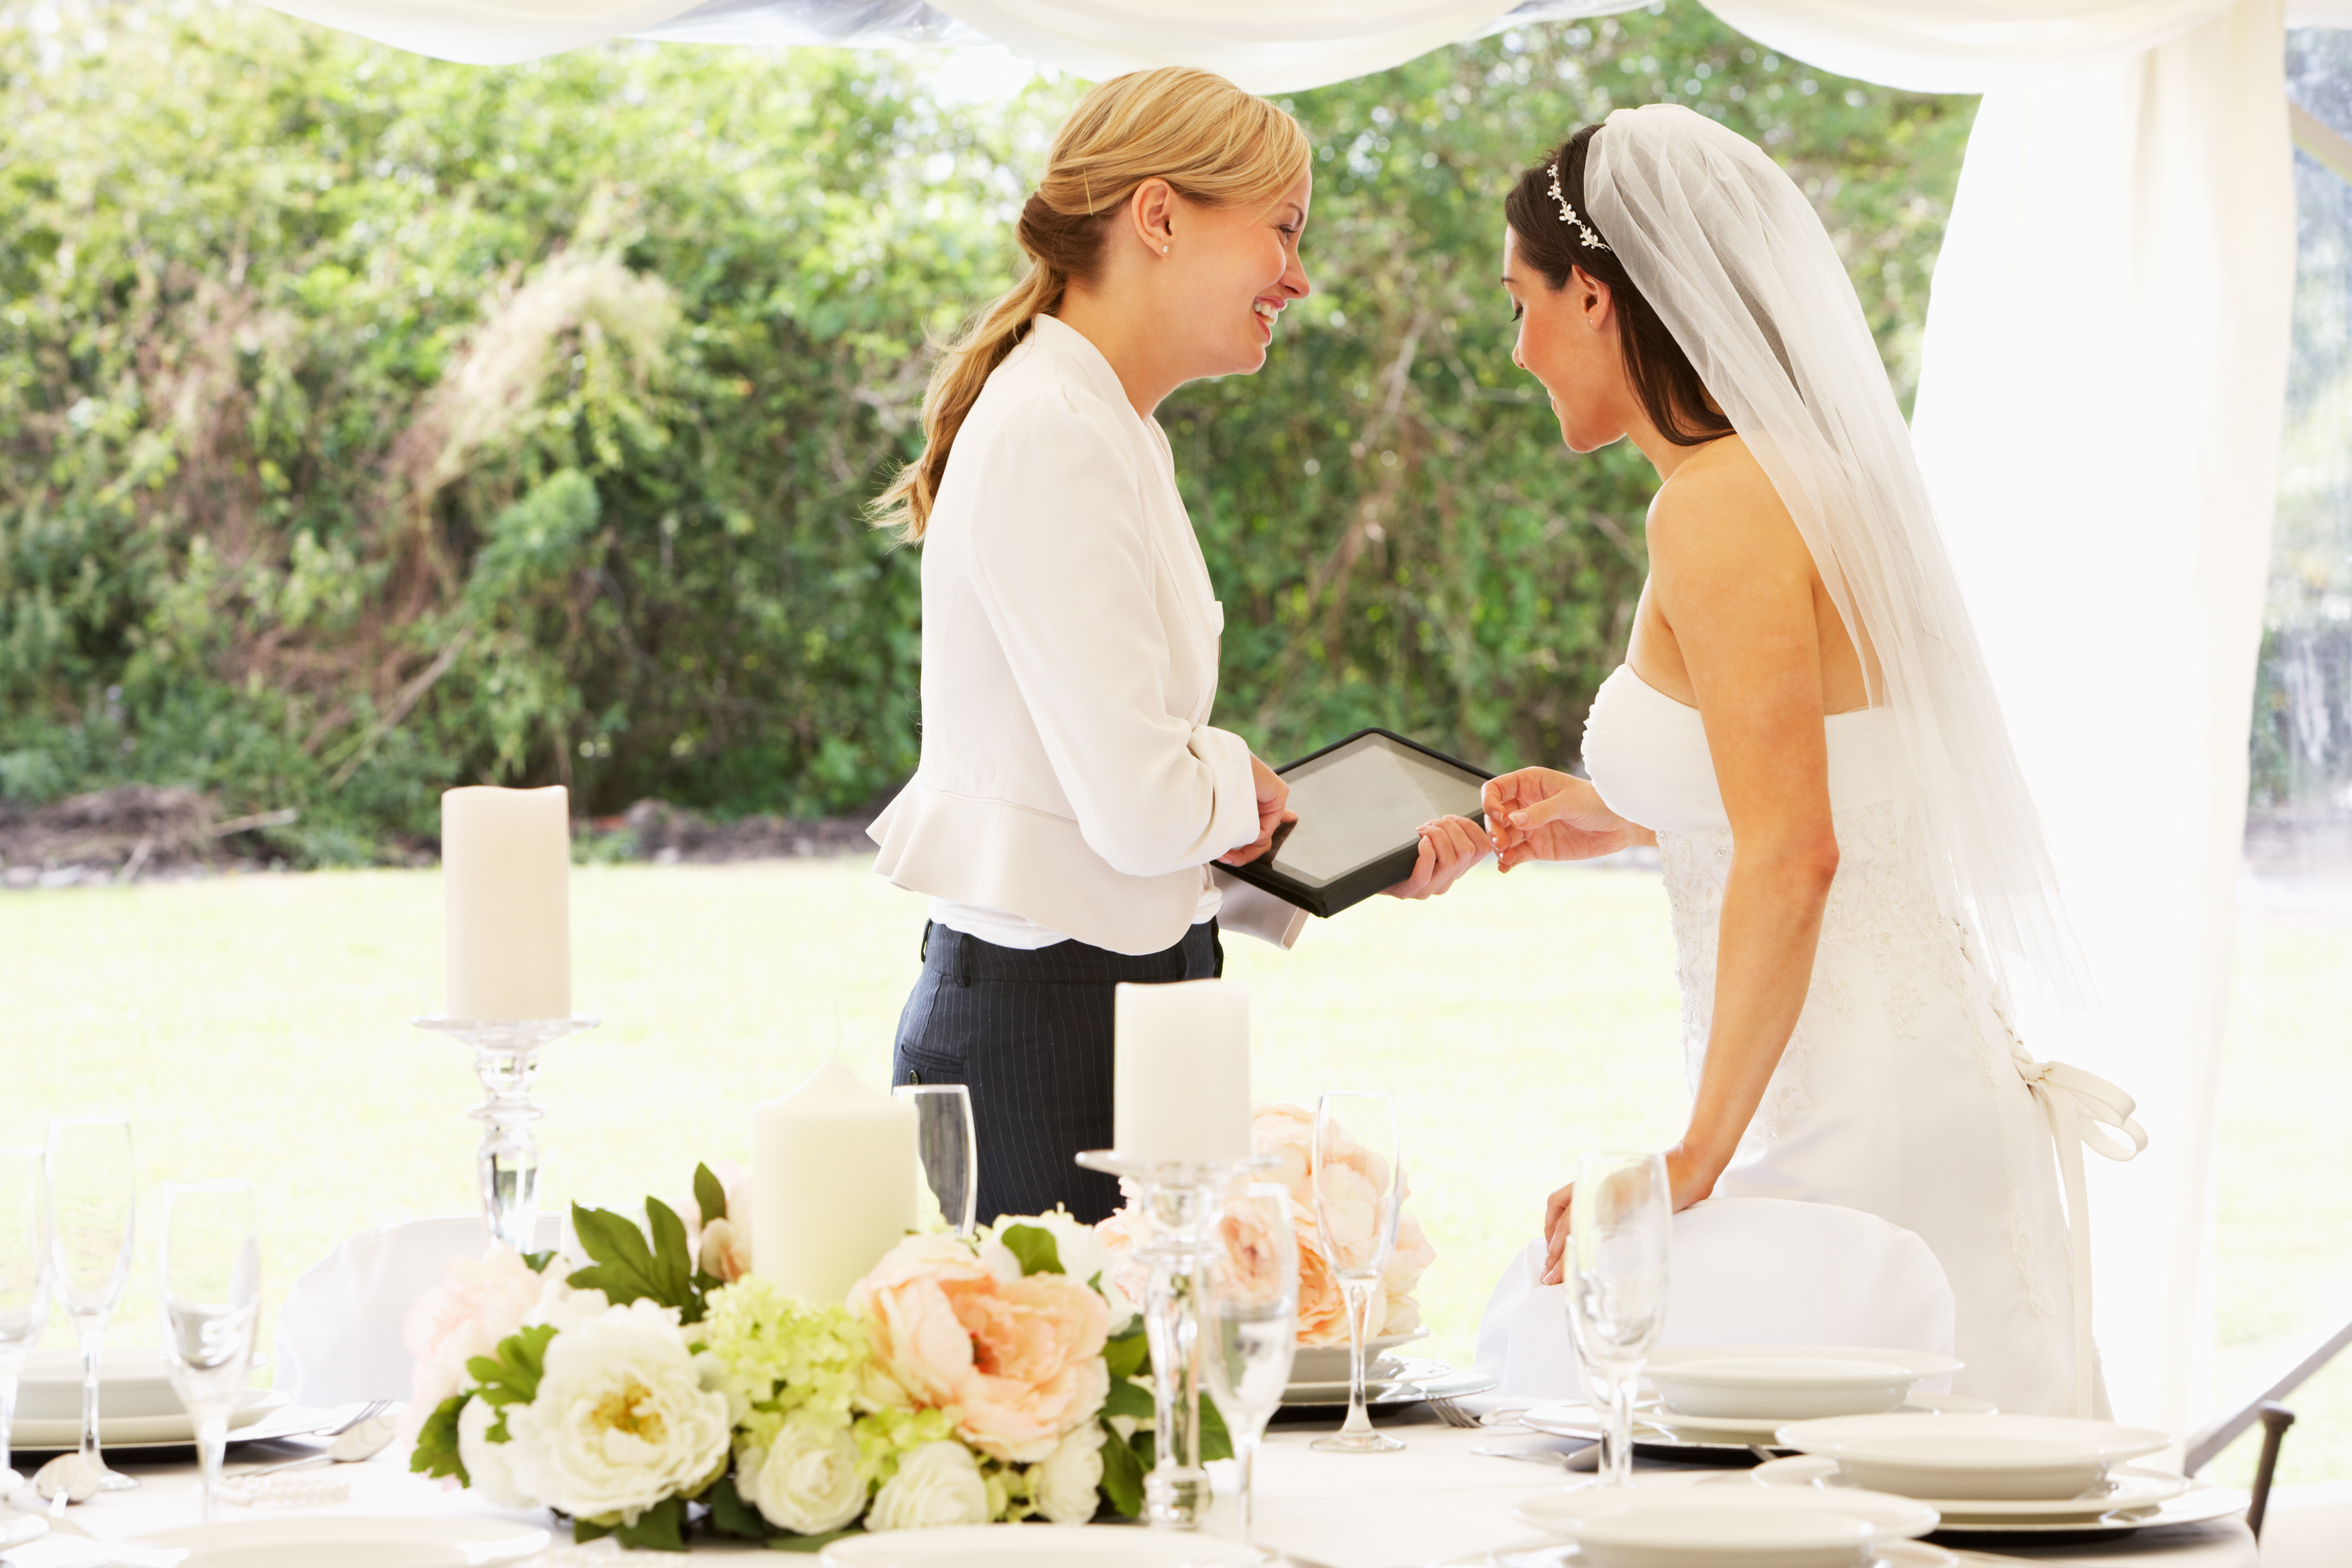 Wedding Planner talking to the bride